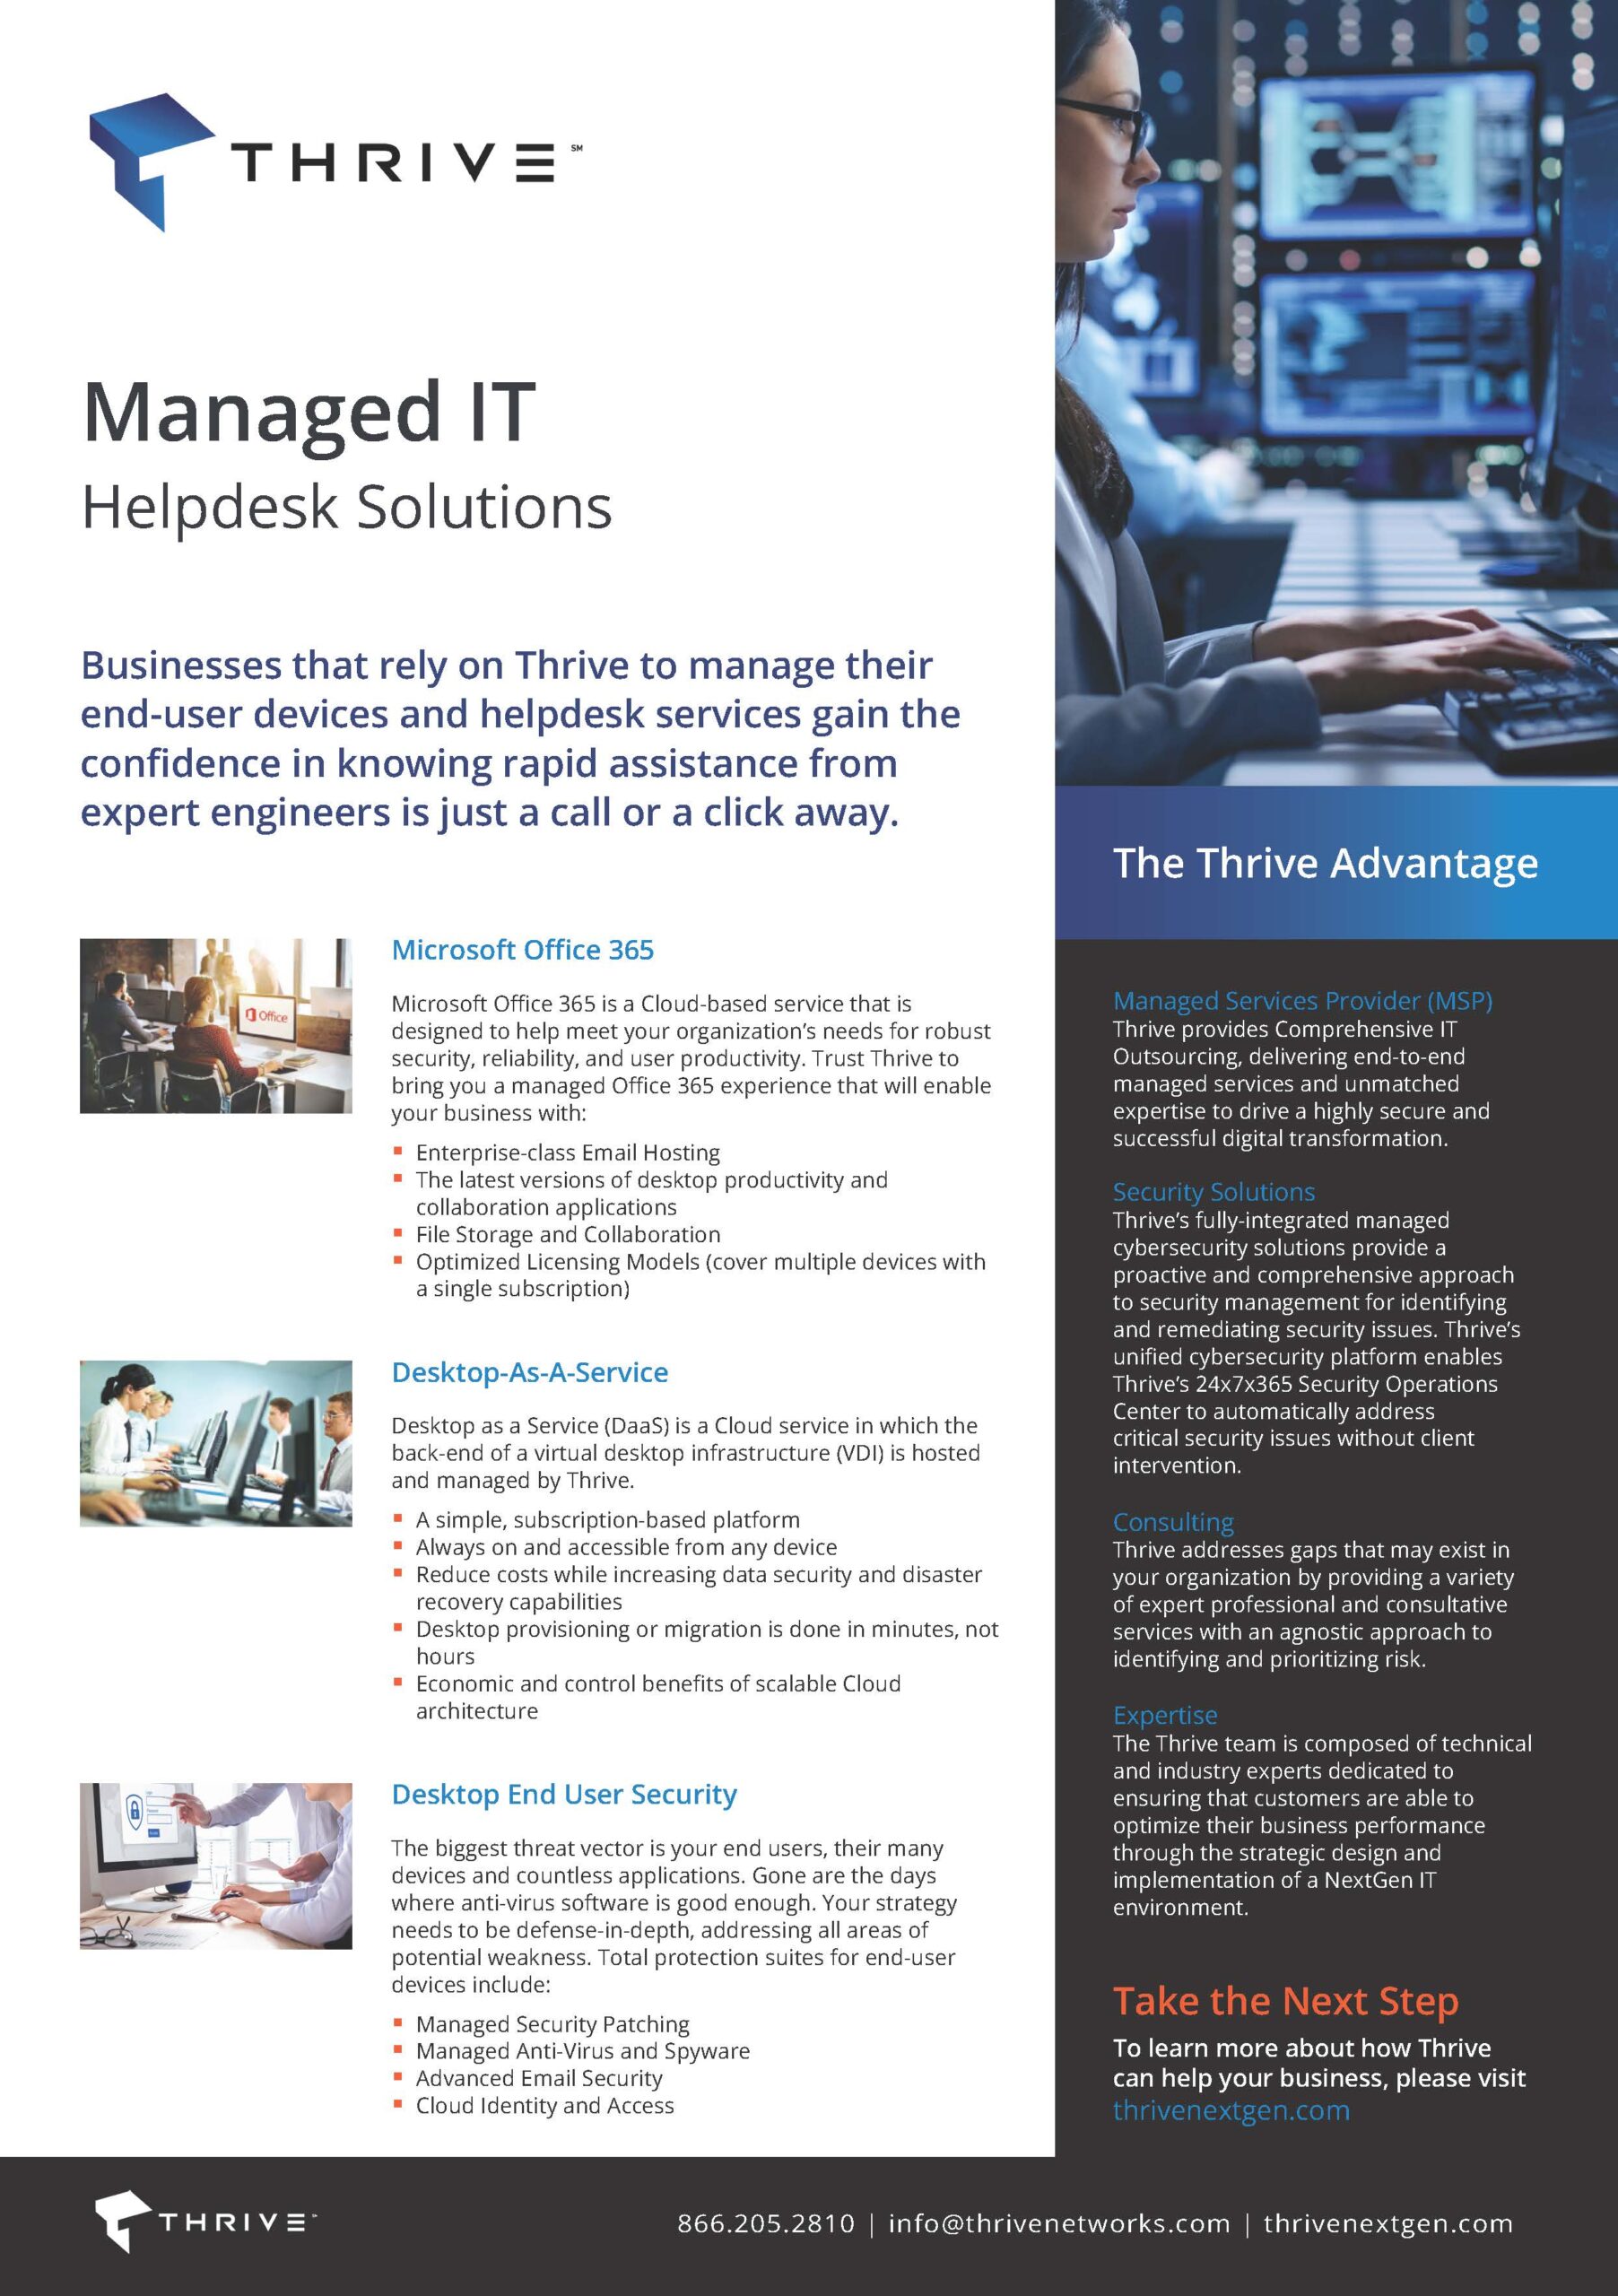 Thrive Managed IT Helpdesk Solutions 052523